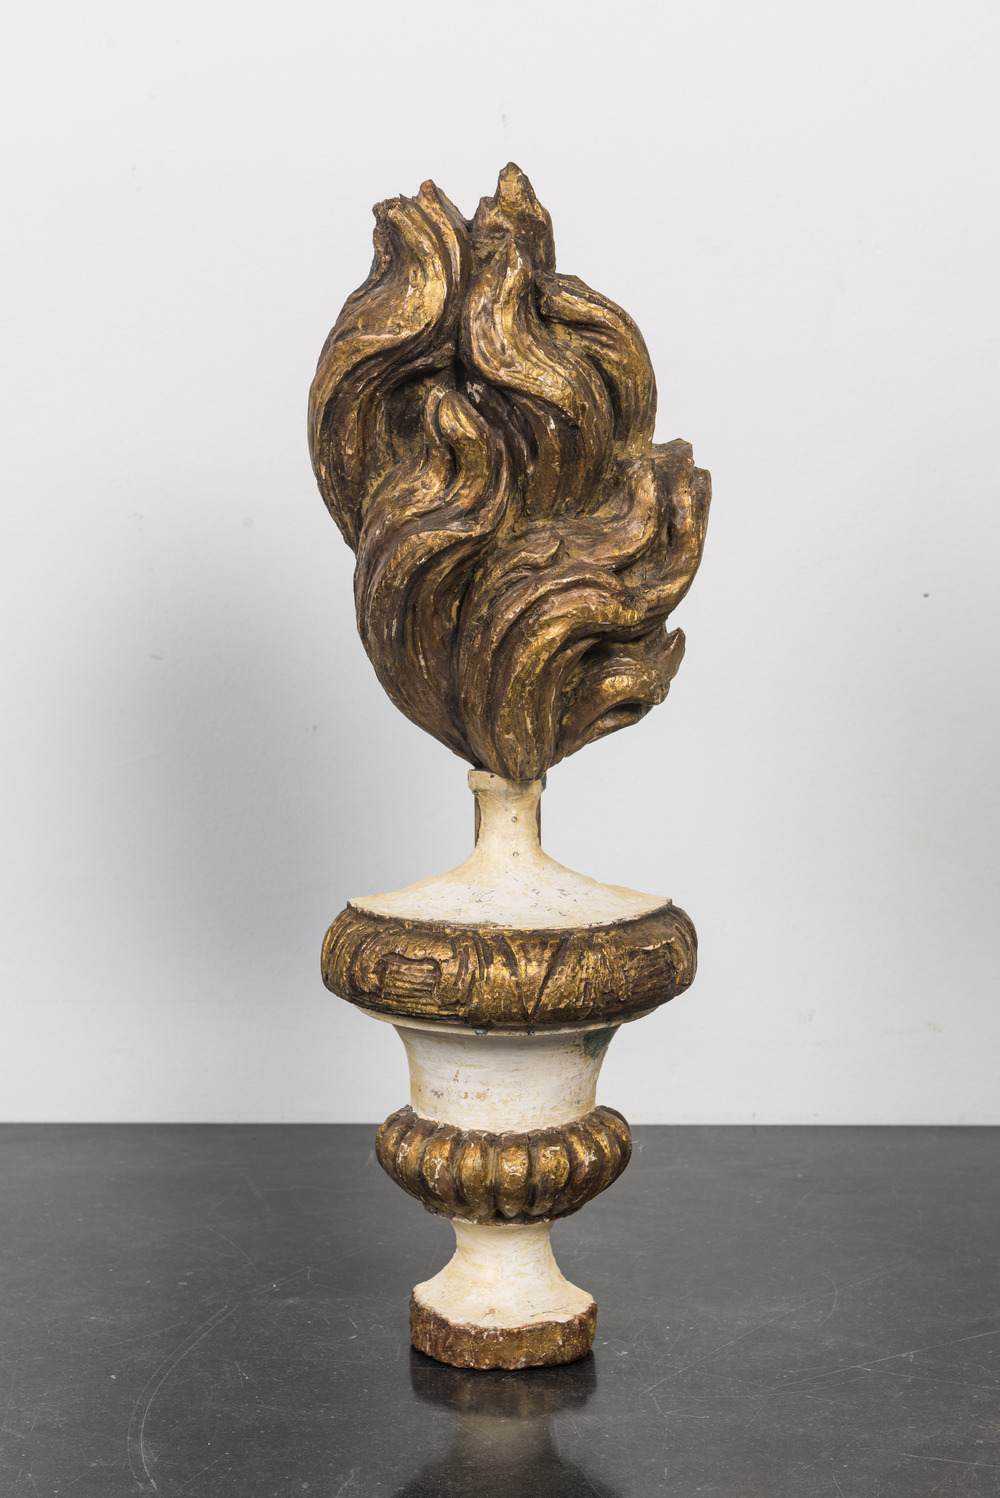 A gilt and painted wooden ornament in the shape of a burning torch, 18th C.